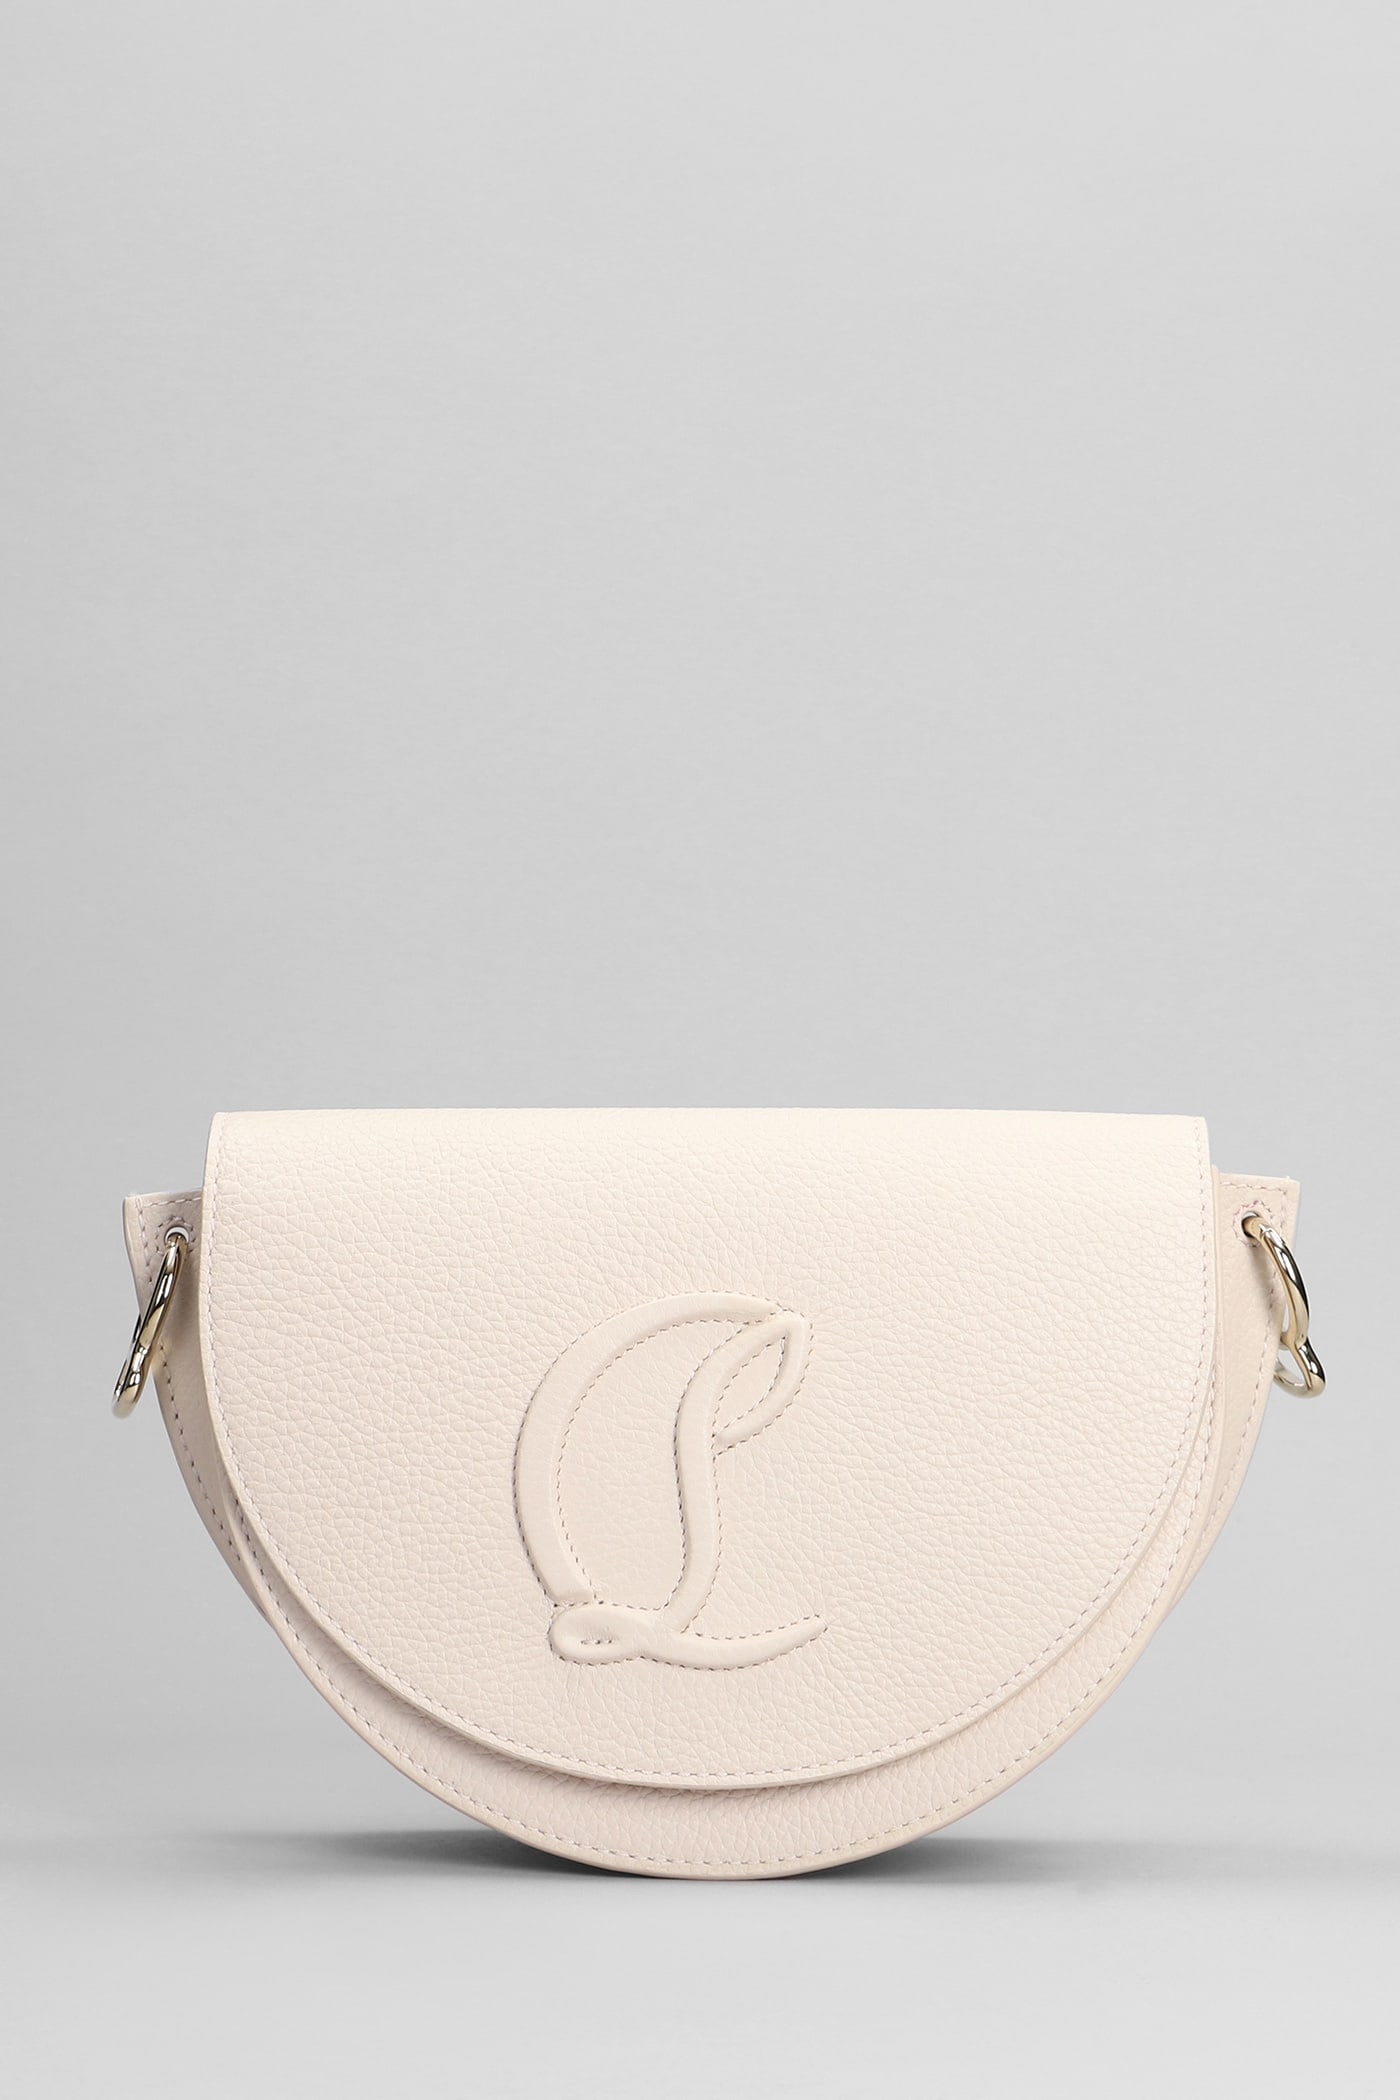 Christian Louboutin By My Side Shoulder Bag In Rose-pink Leather